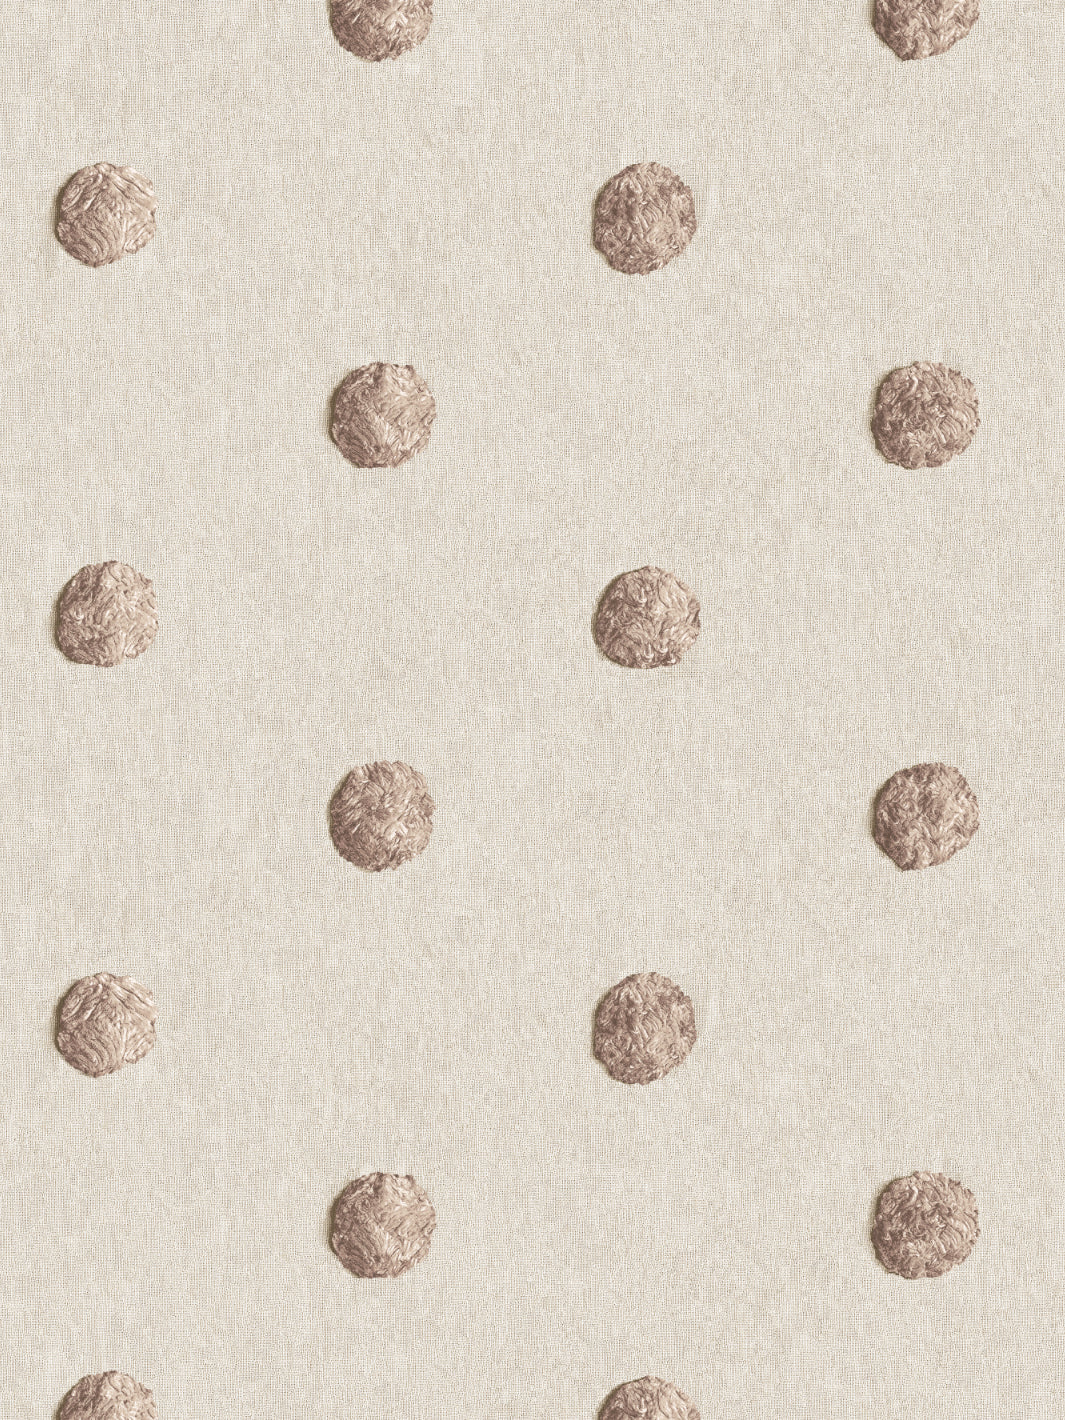 'Chenille Dots Small' Wallpaper by Chris Benz - Latte